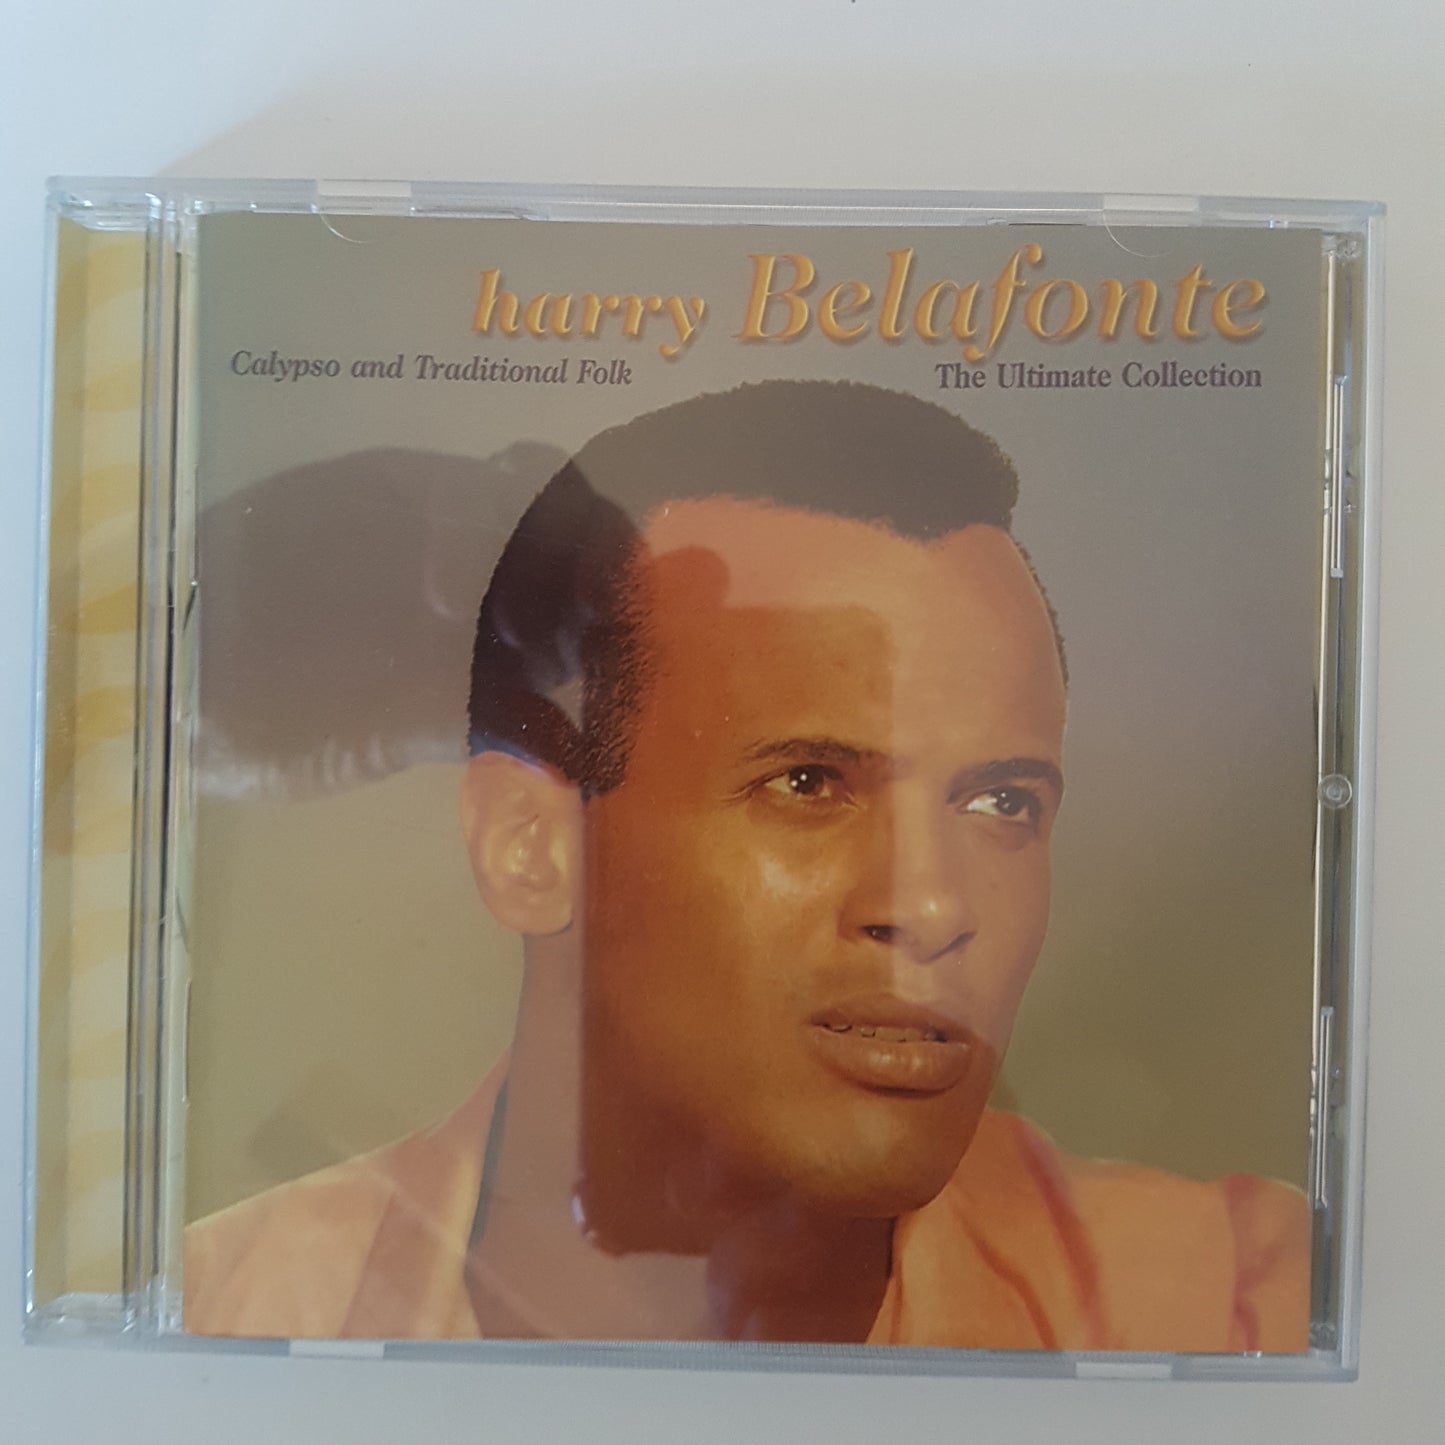 Harry Belafonte, The Ultimate Collection (1CD)